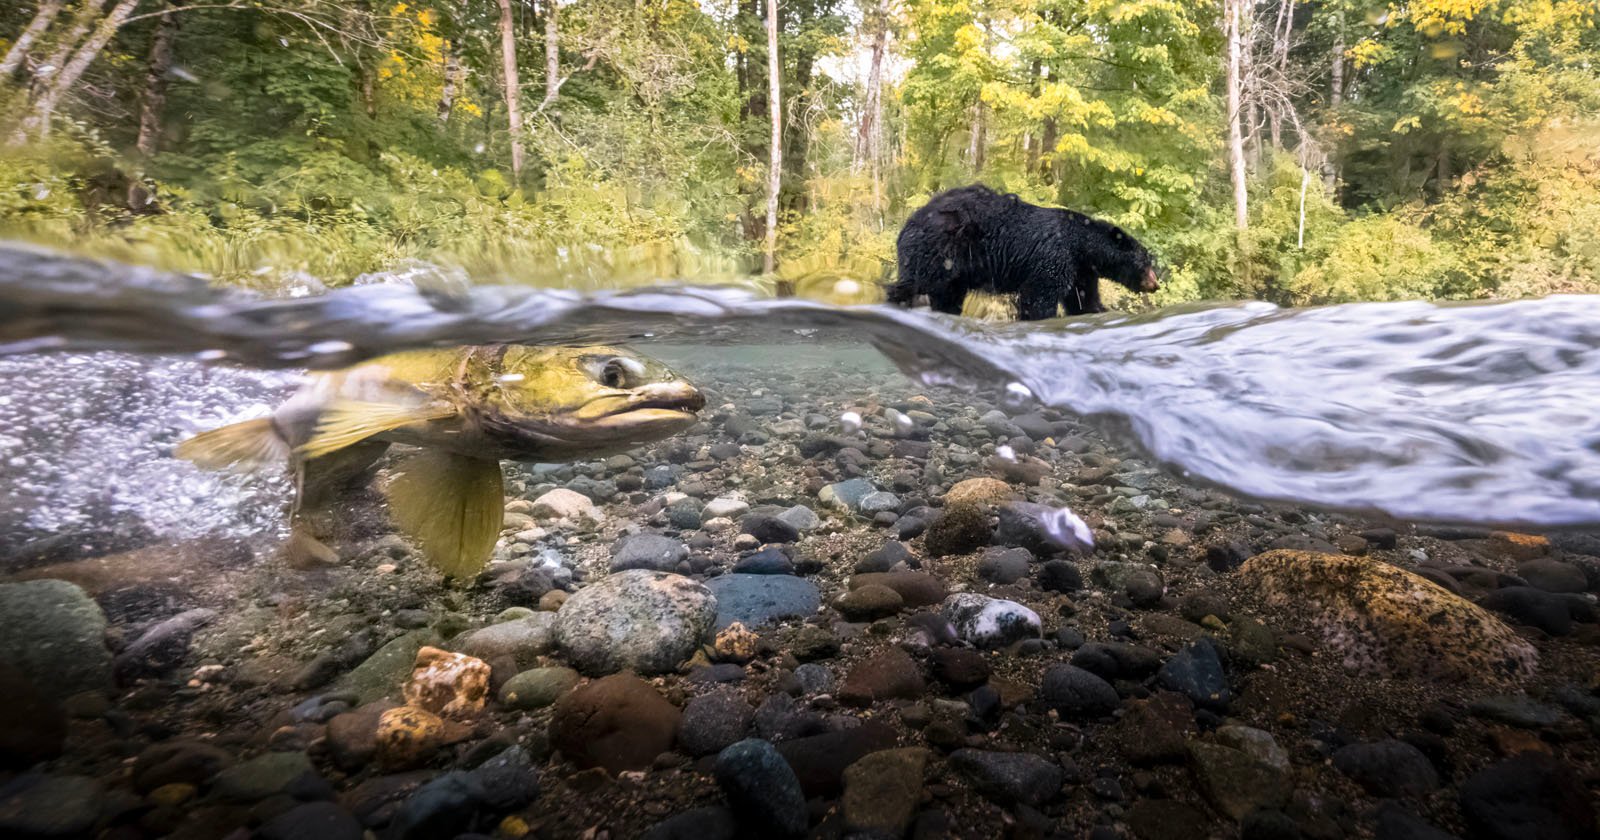  bear salmon pictured together canada best nature 